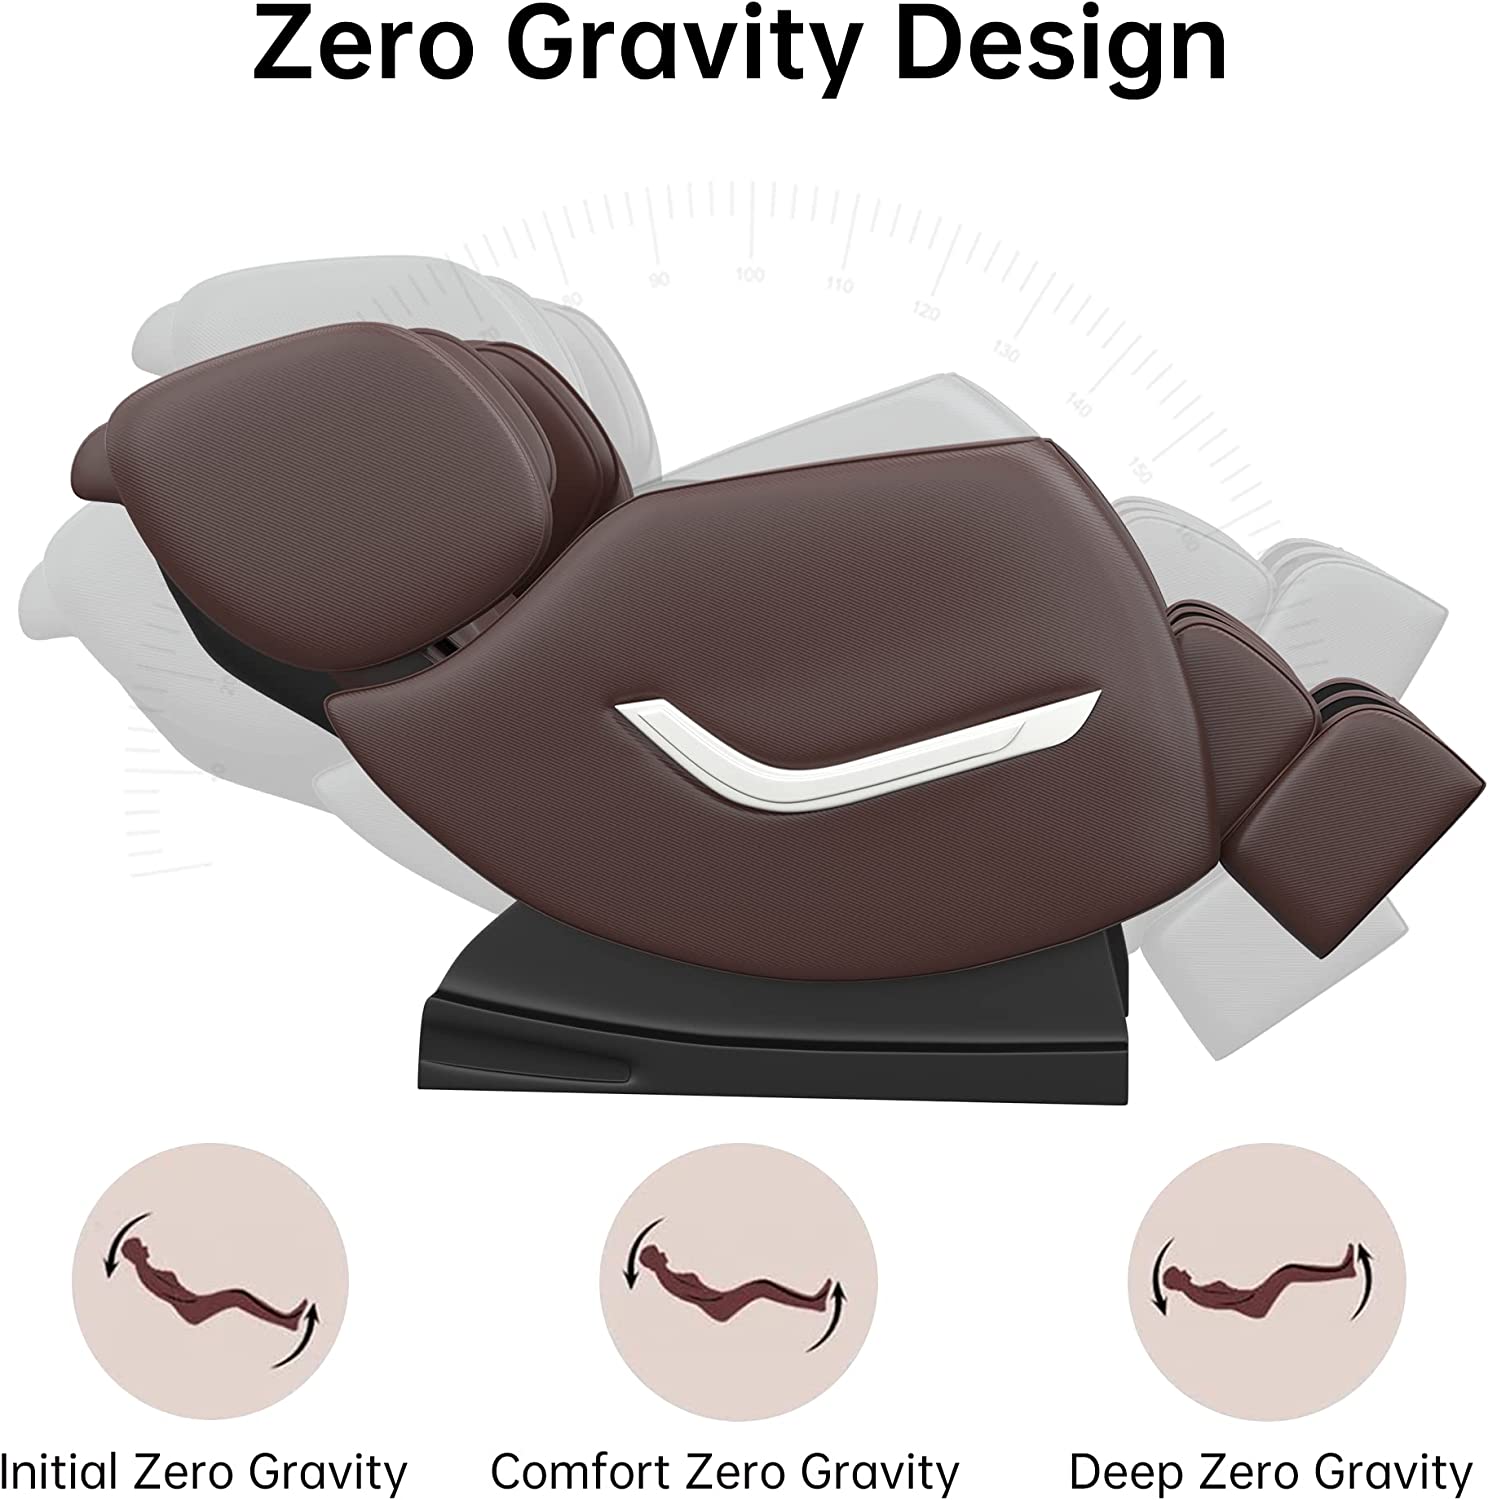 Real Relax Massage Chair Real Relax® SS01 Massage Chair Brown